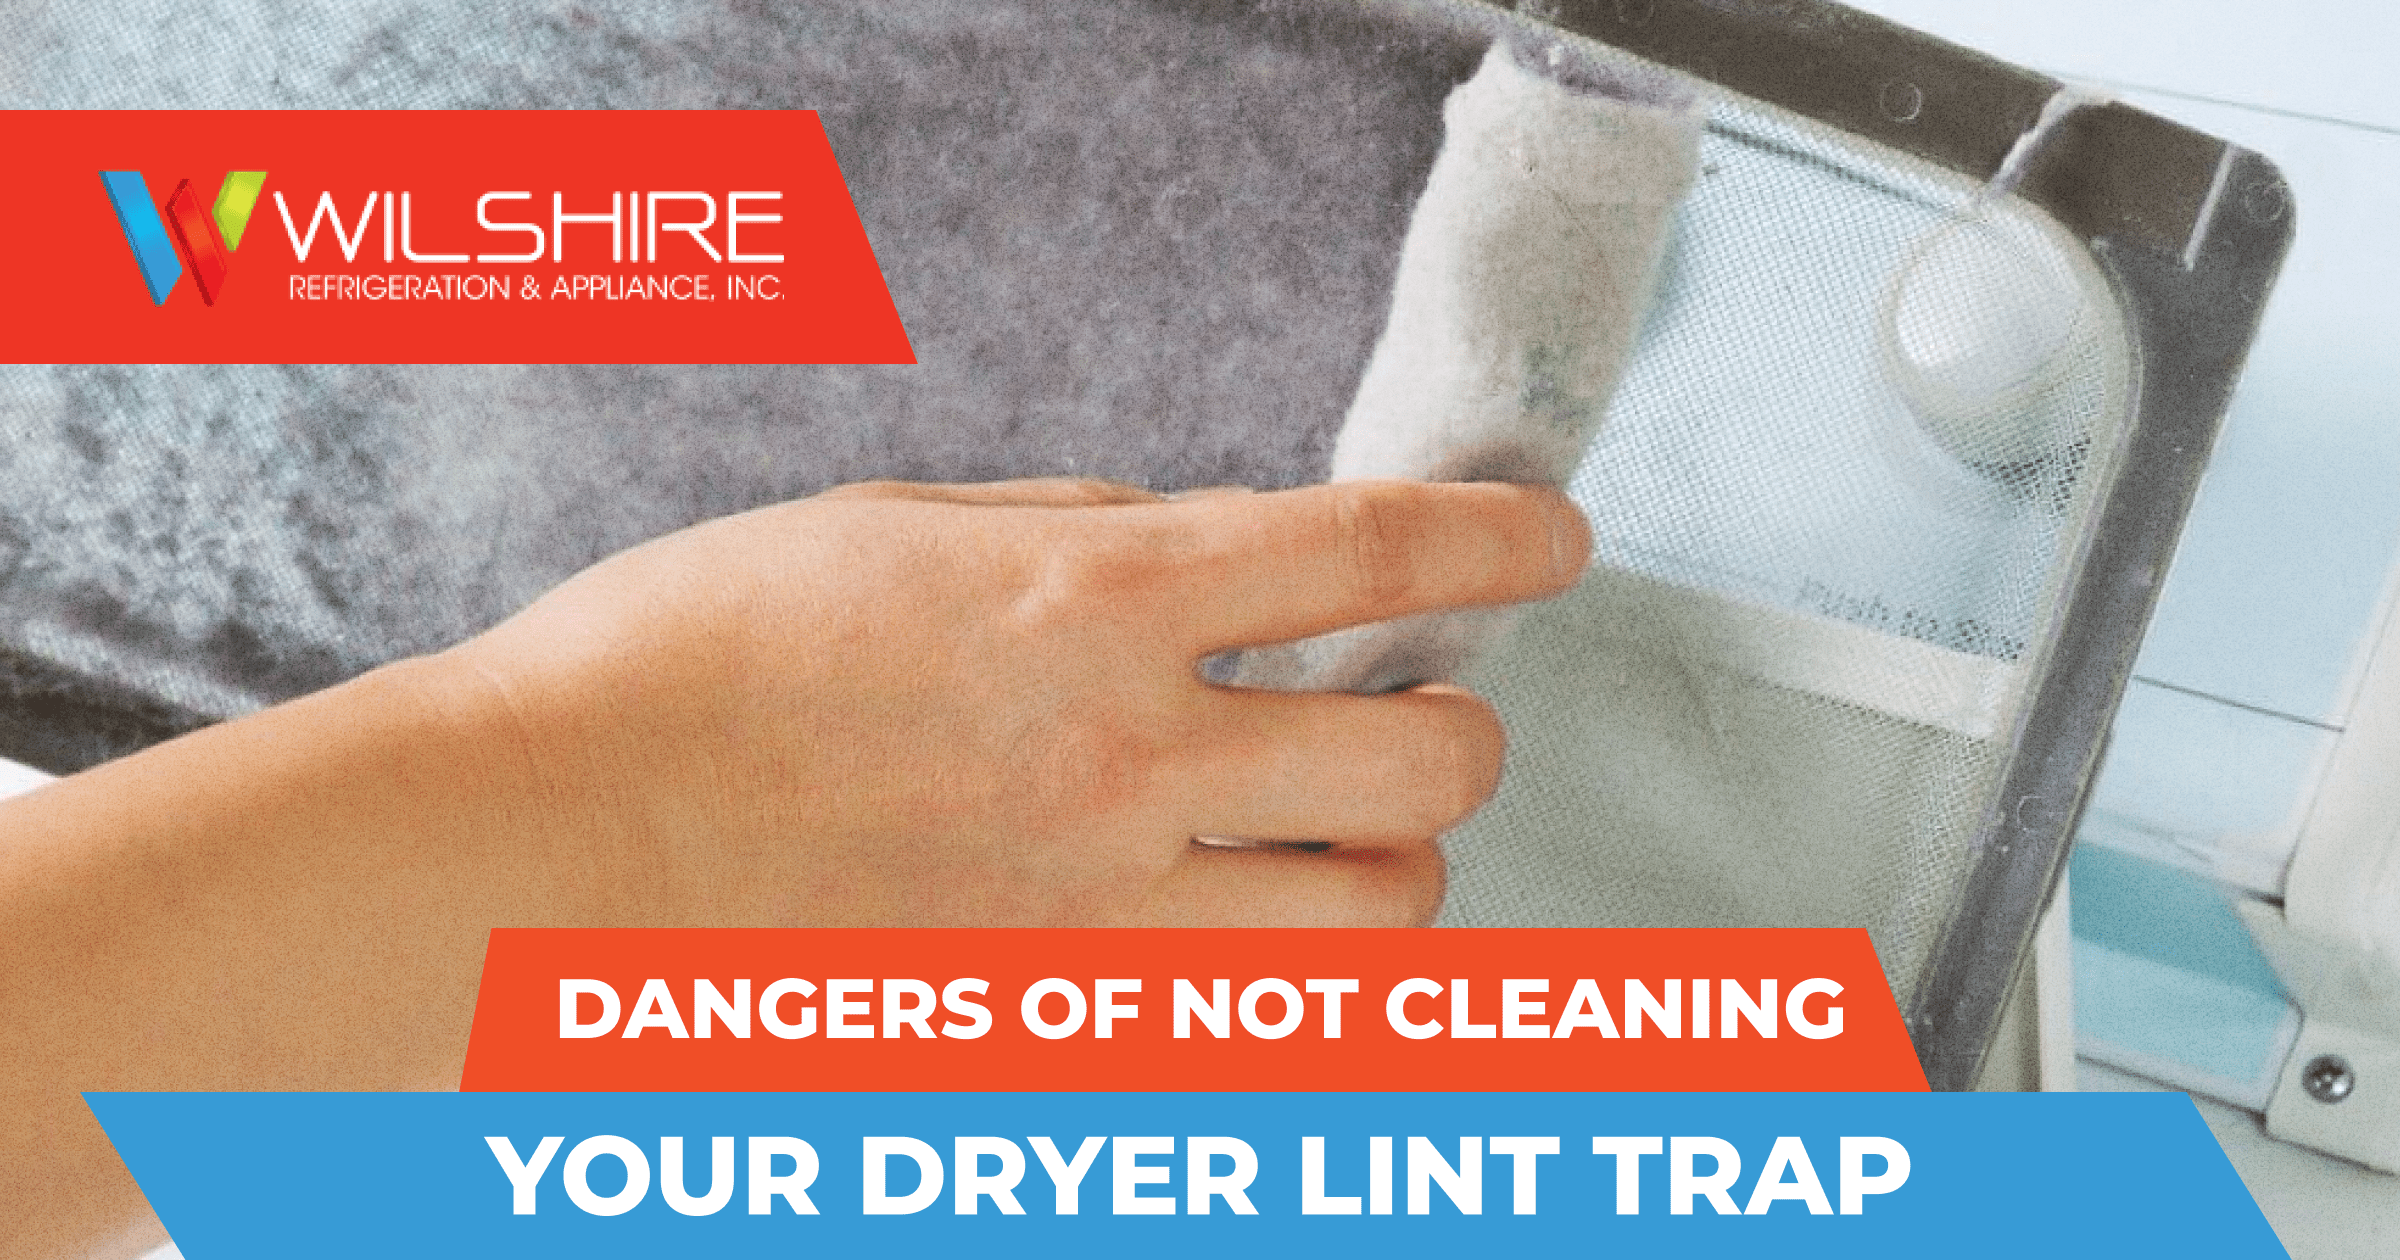 https://wilshirerefrigeration.com/wp-content/uploads/2022/09/Wilshire-Refrigeration-Dangers-of-Not-Cleaning-Your-Dryer-Lint-Trap.png